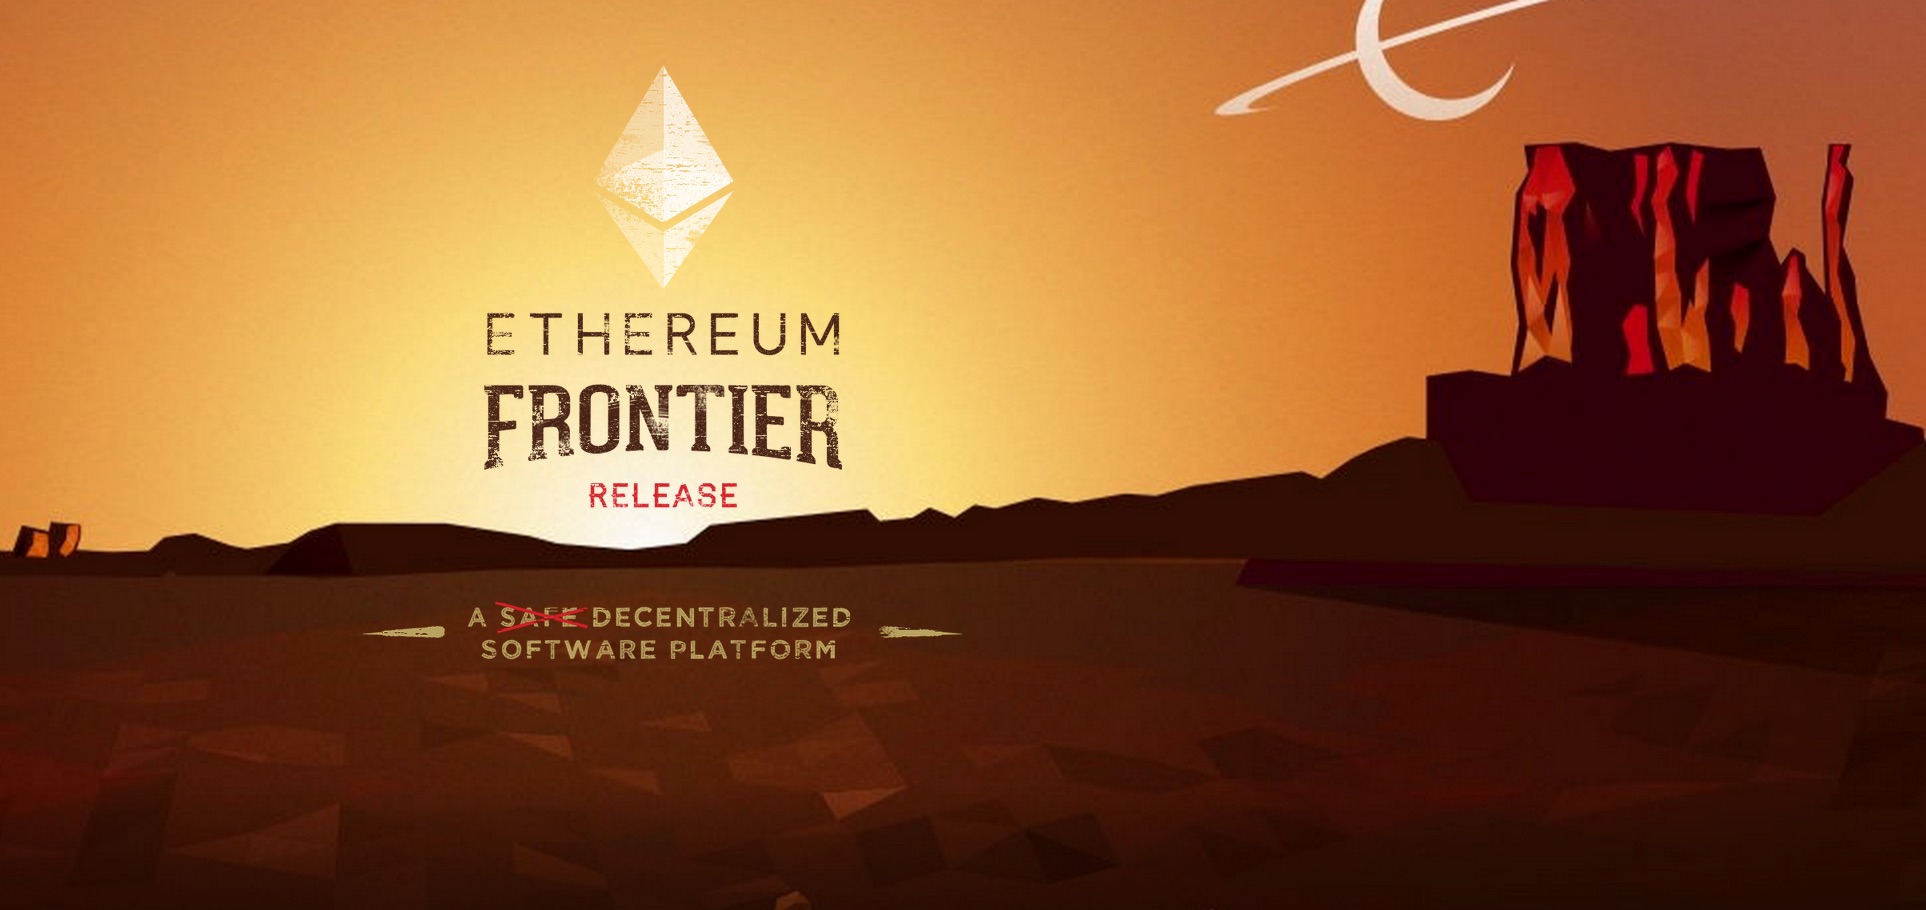 Where To Buy Frontier Crypto - Ethereum Frontier Crypto ...